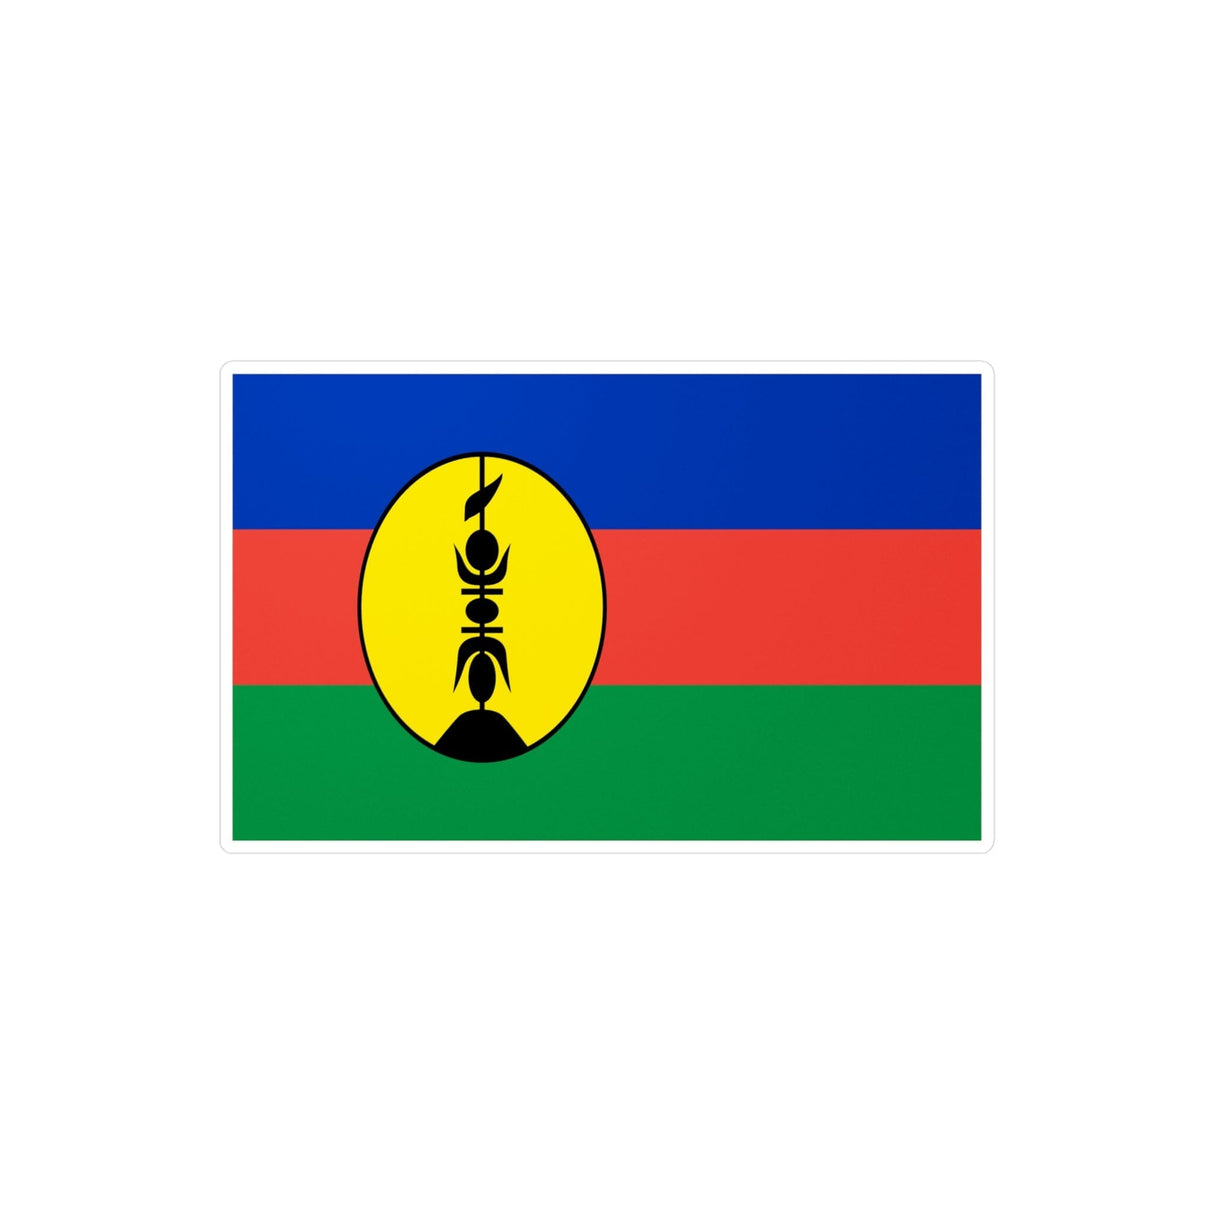 New Caledonia Flags sticker in several sizes - Pixelforma